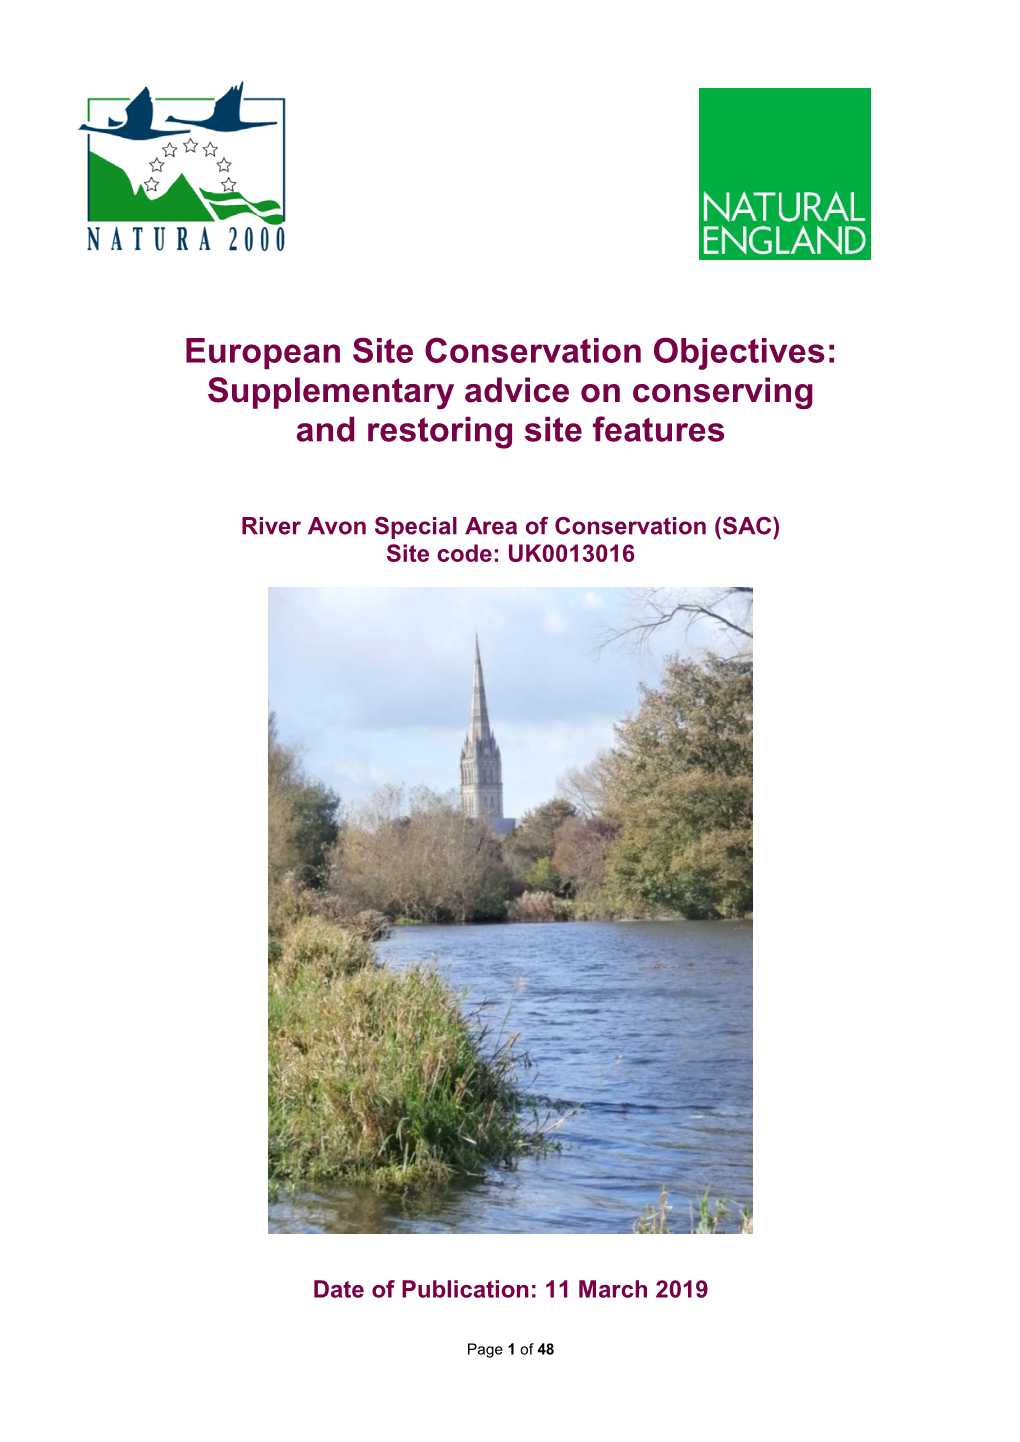 River Avon SAC Conservation Objectives Supplementary Advice